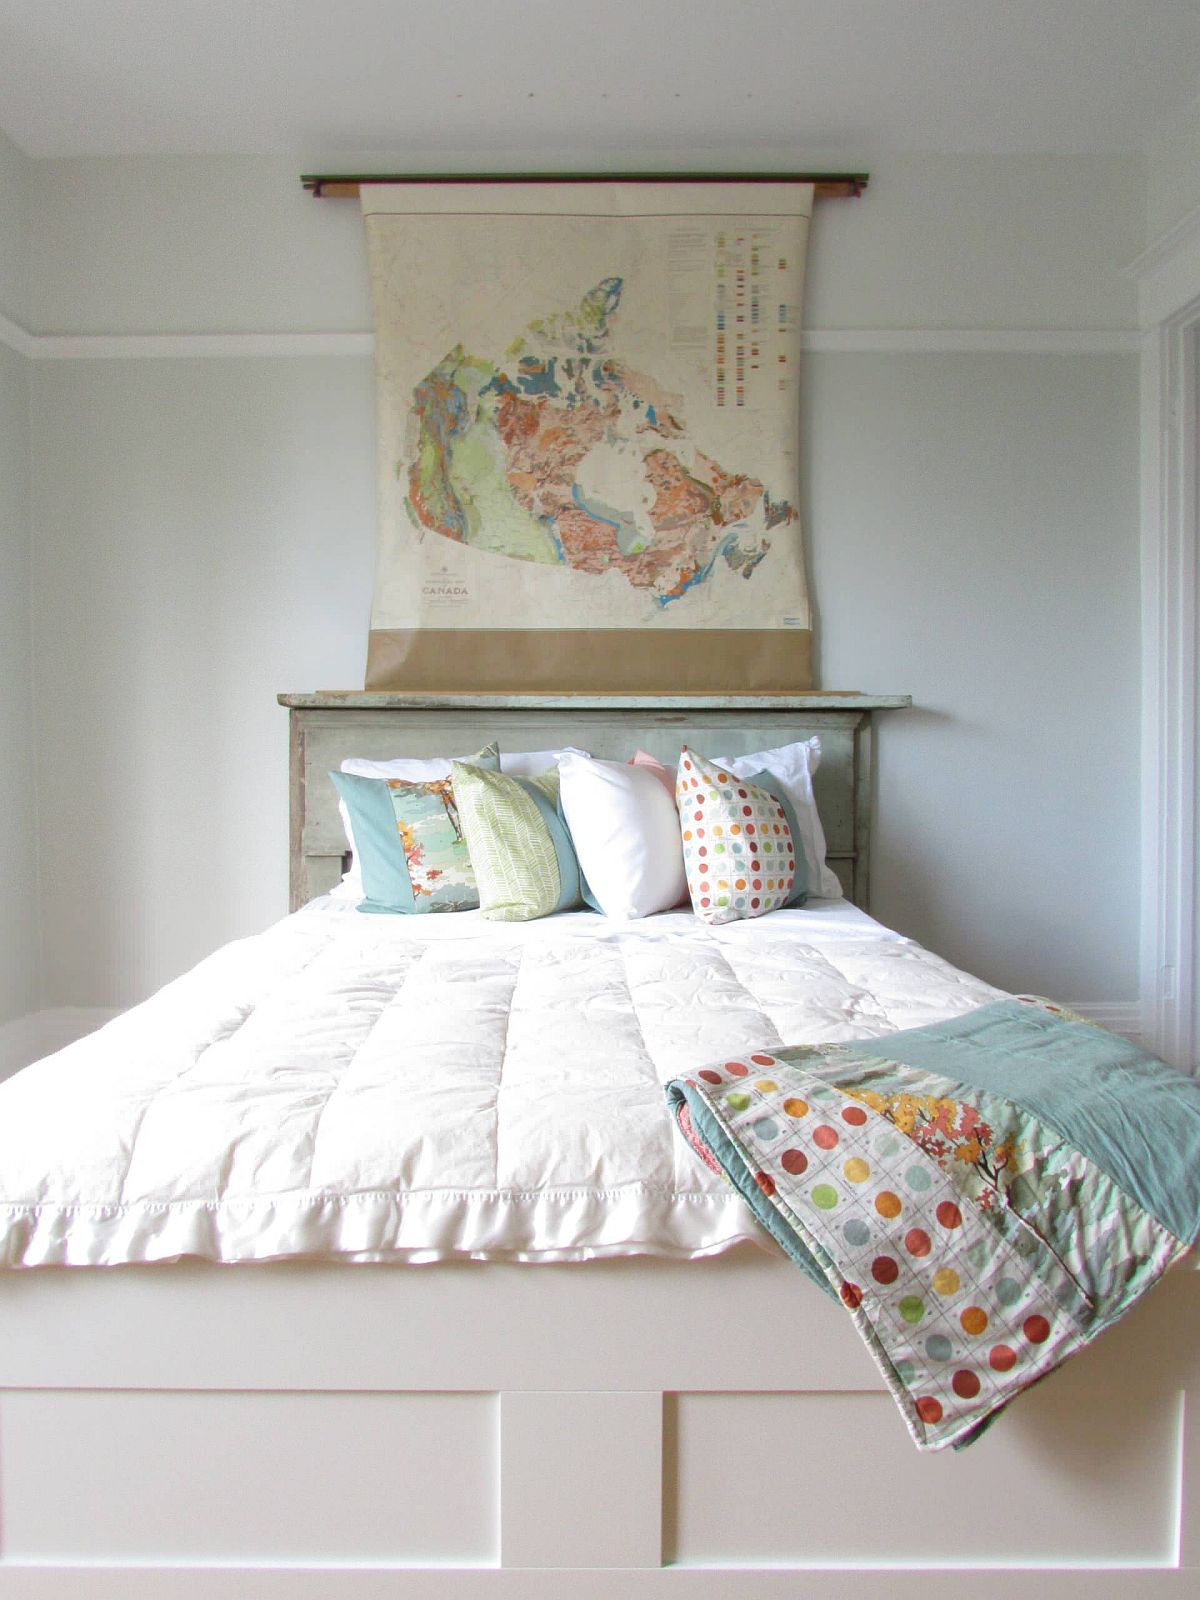 Shabby chic bedroom in white where the map above the headboard usher in color